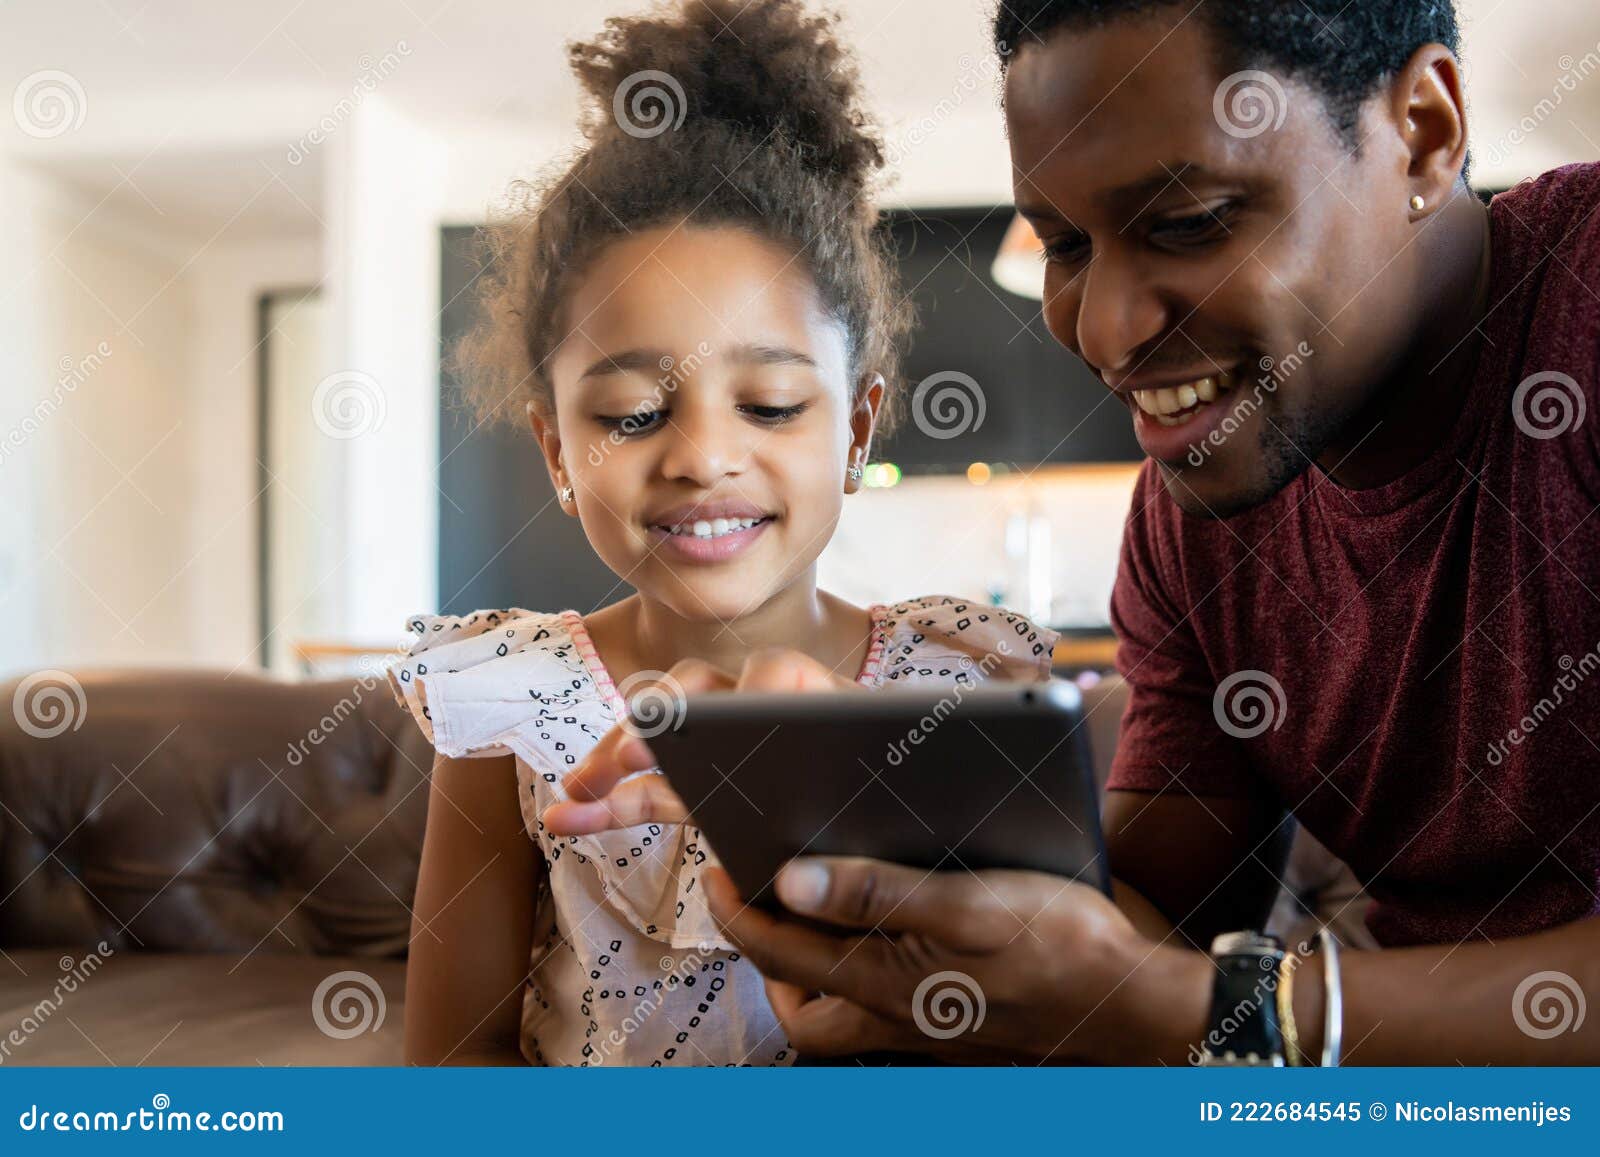 father and daughter using digital tablet at home.